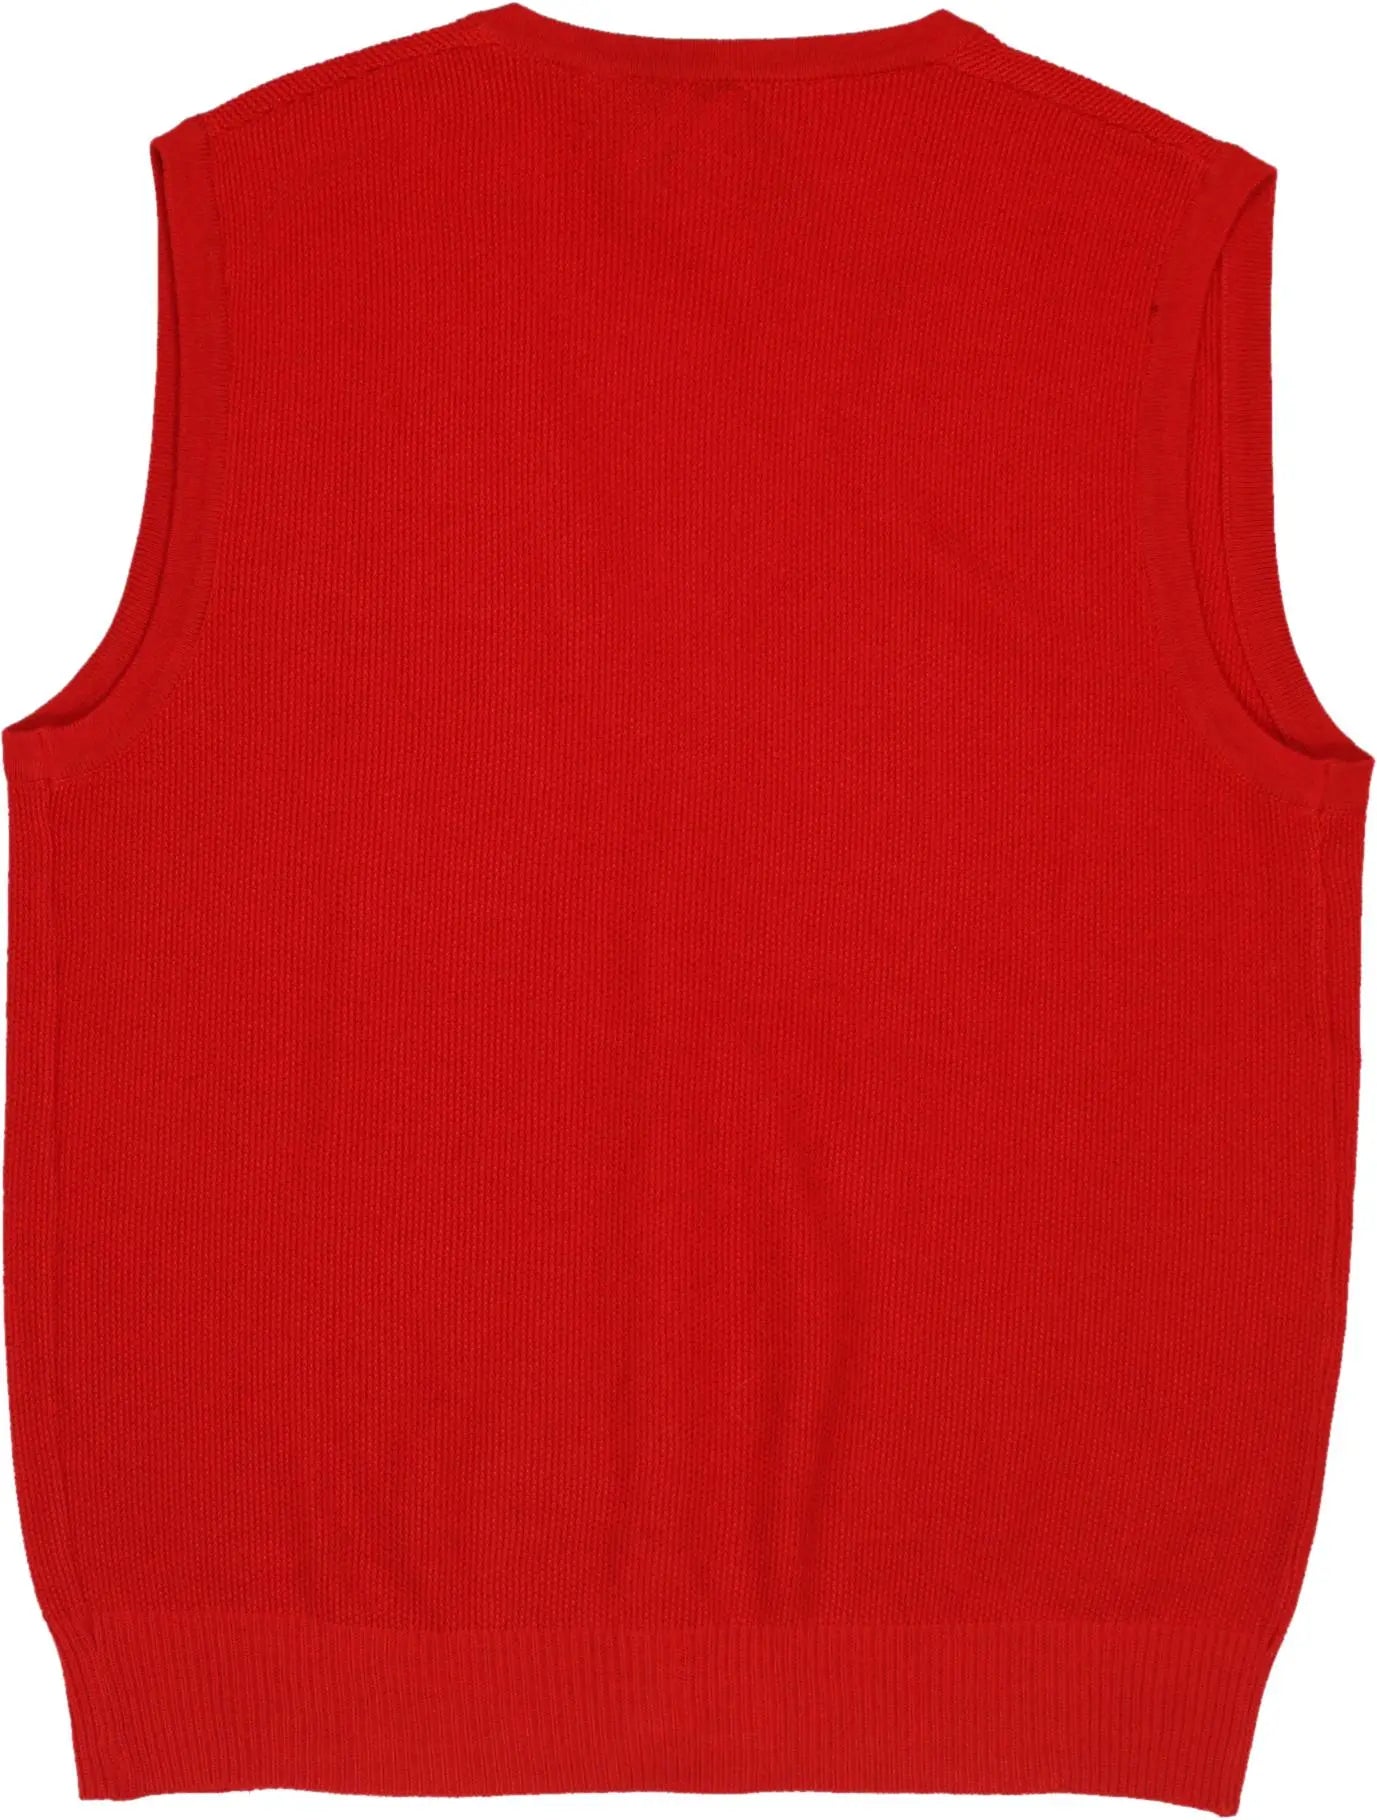 Unknown - Red vest- ThriftTale.com - Vintage and second handclothing